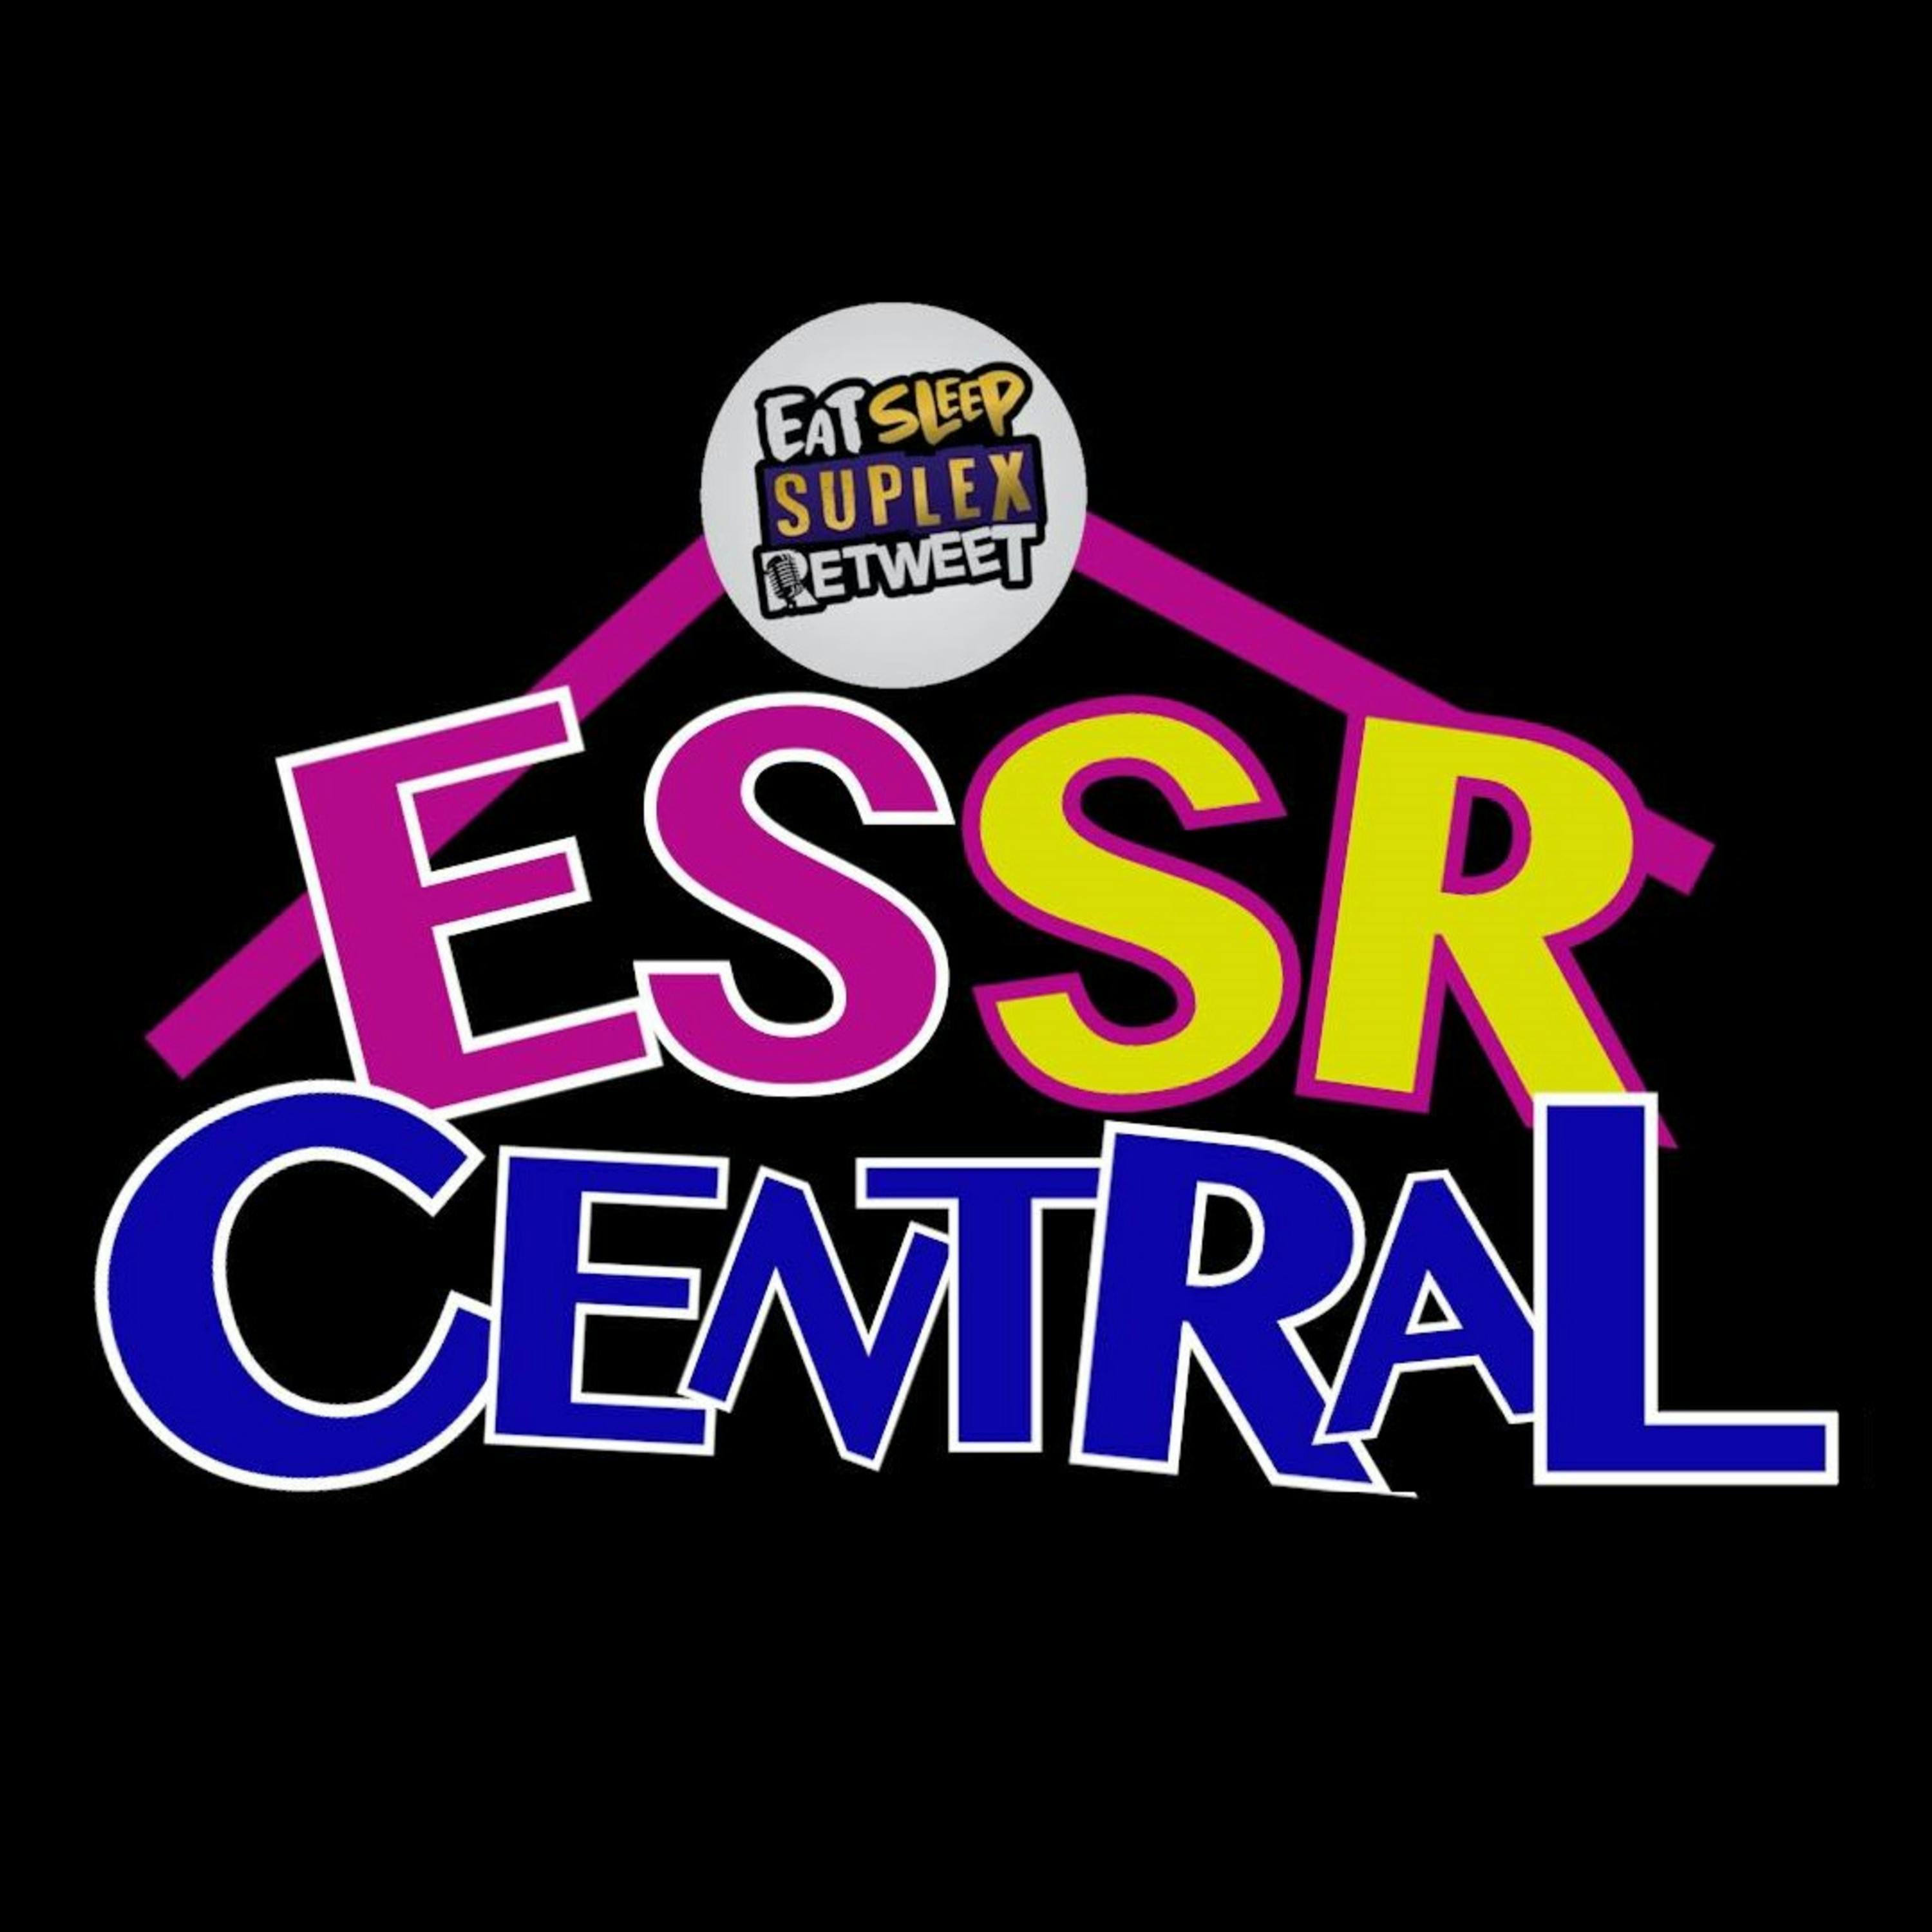 ESSR Central #025 - Road to WrestleMania, Big Show to AEW, Fast Lane to Peacock and The Sky Is Blue